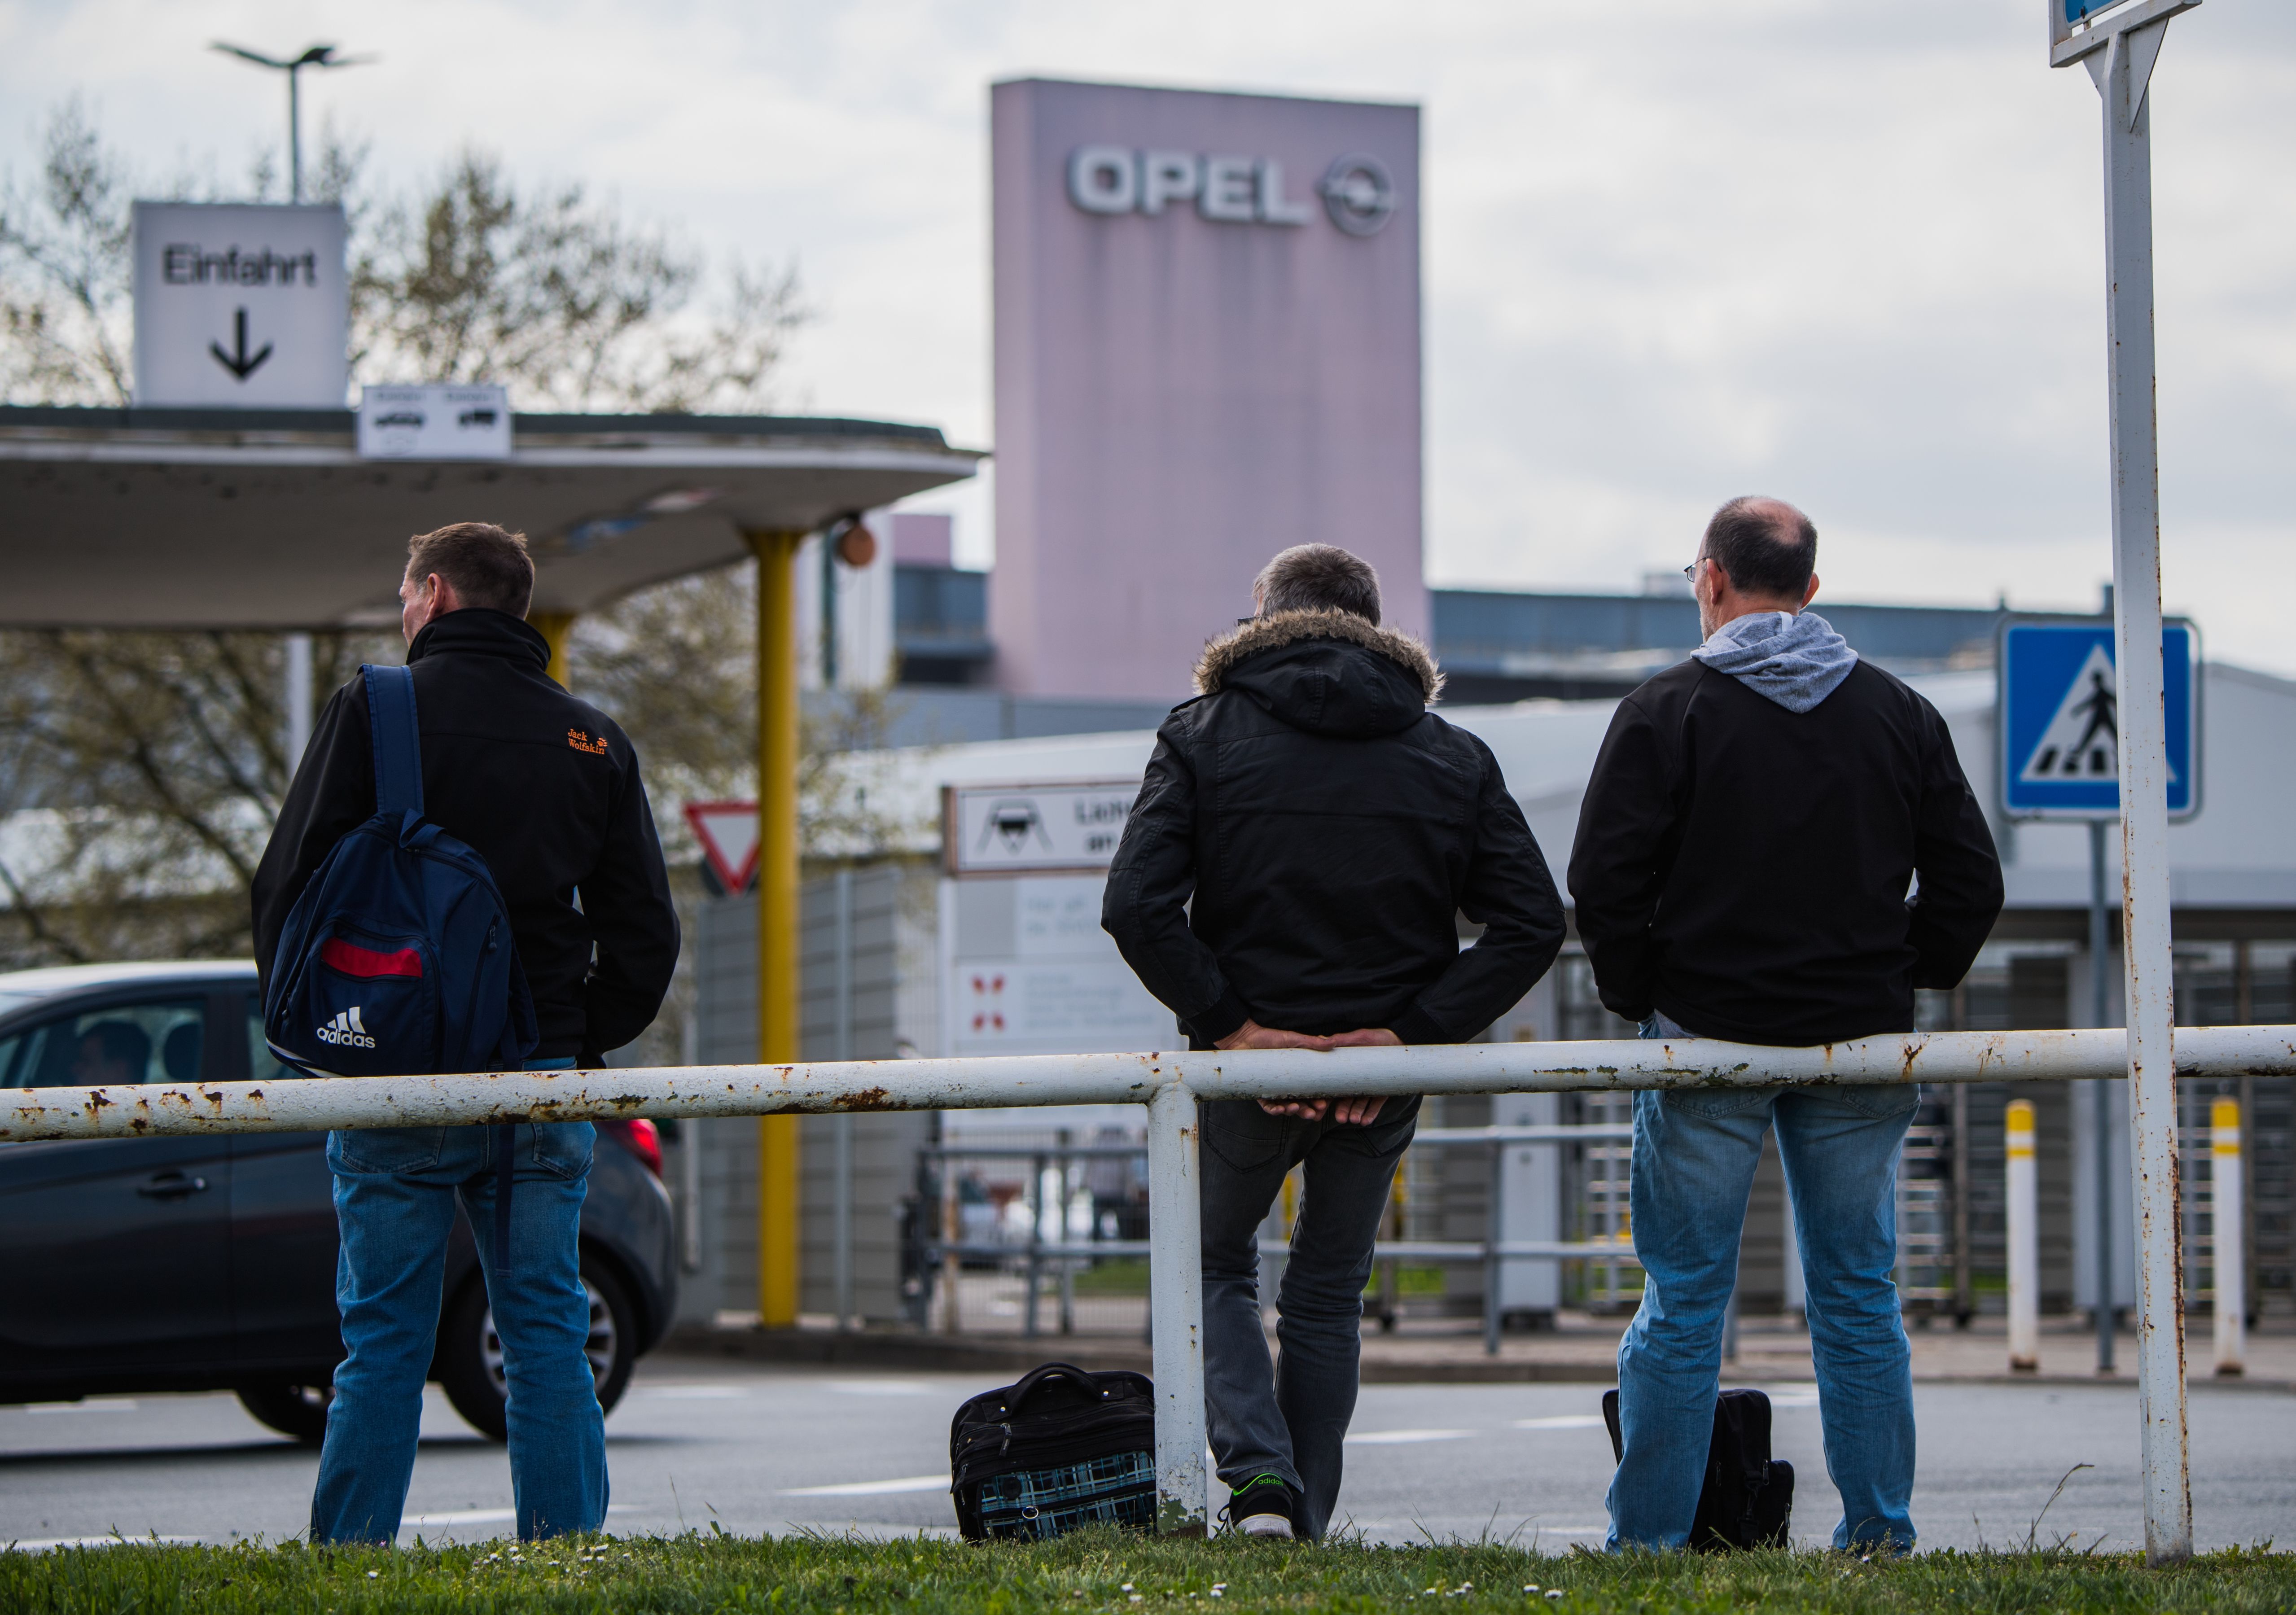 Why General Motors sold Opel and Vauxhall brands in Europe